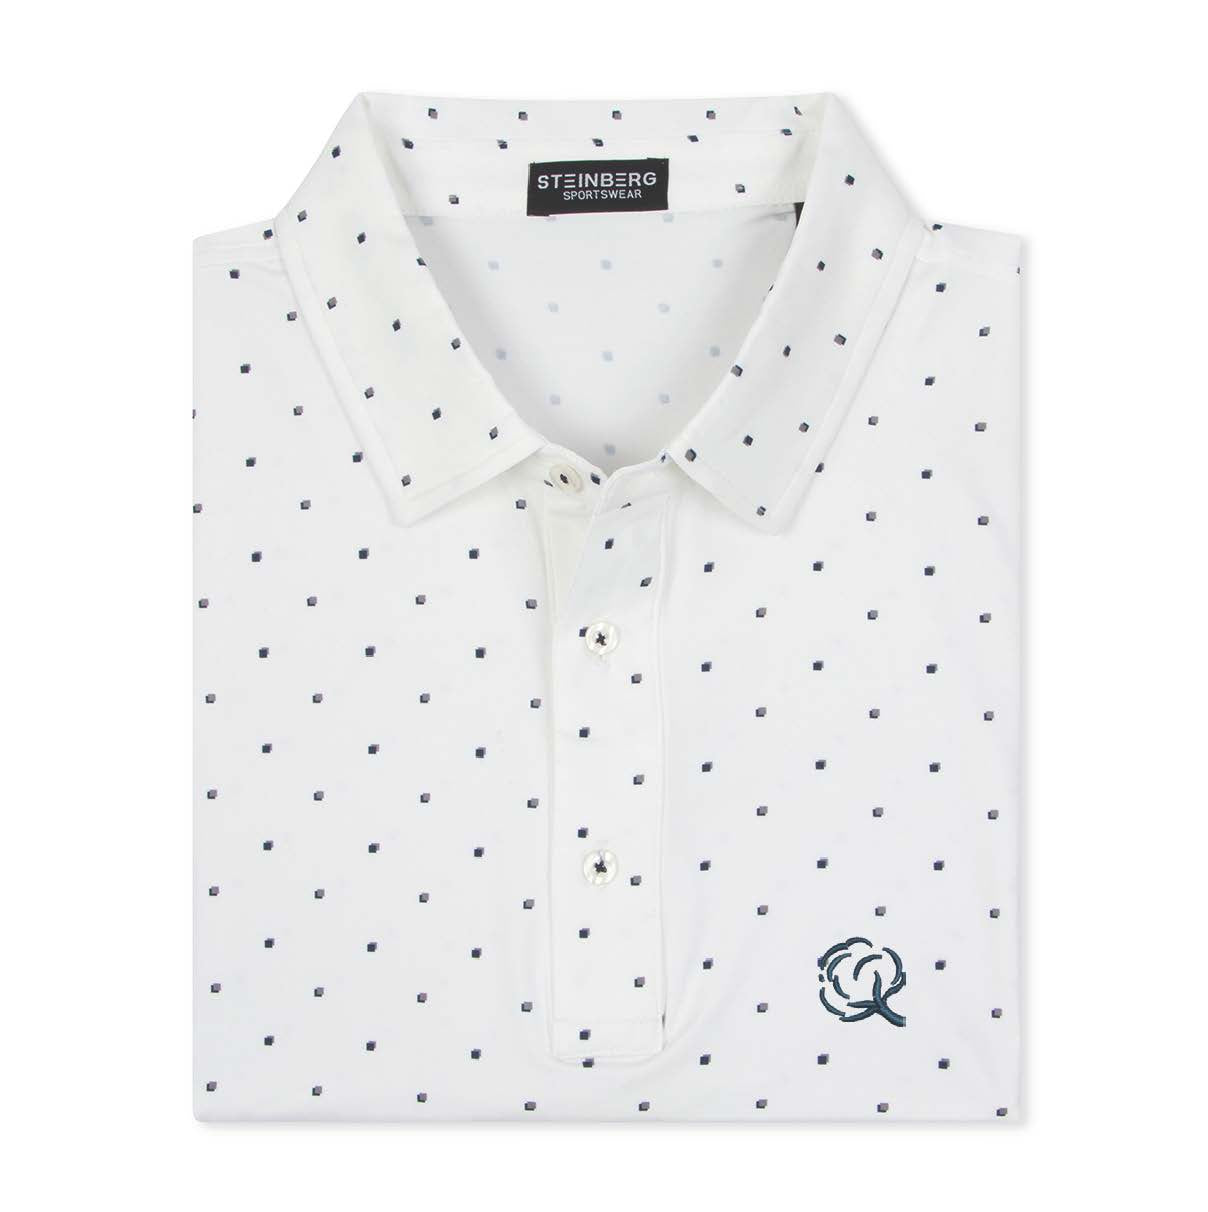 The All Square Performance Polo Cotton Collection